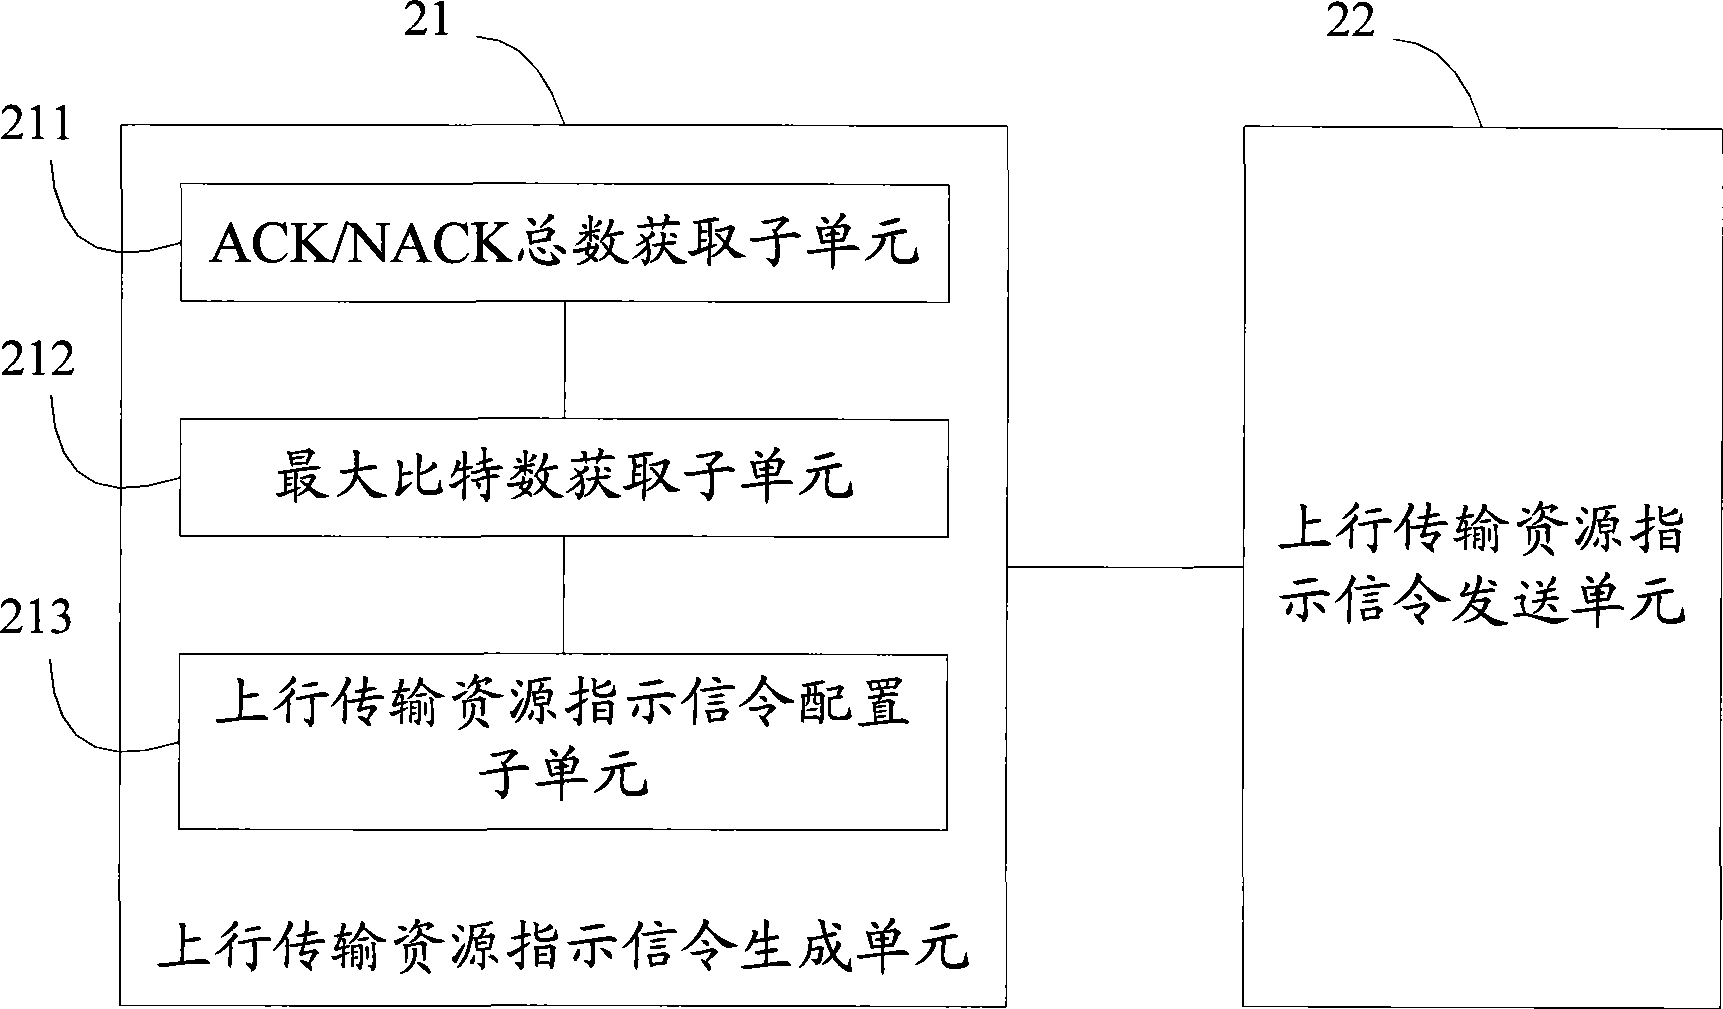 Method and device for ACK/NACK information indication and data retransmission